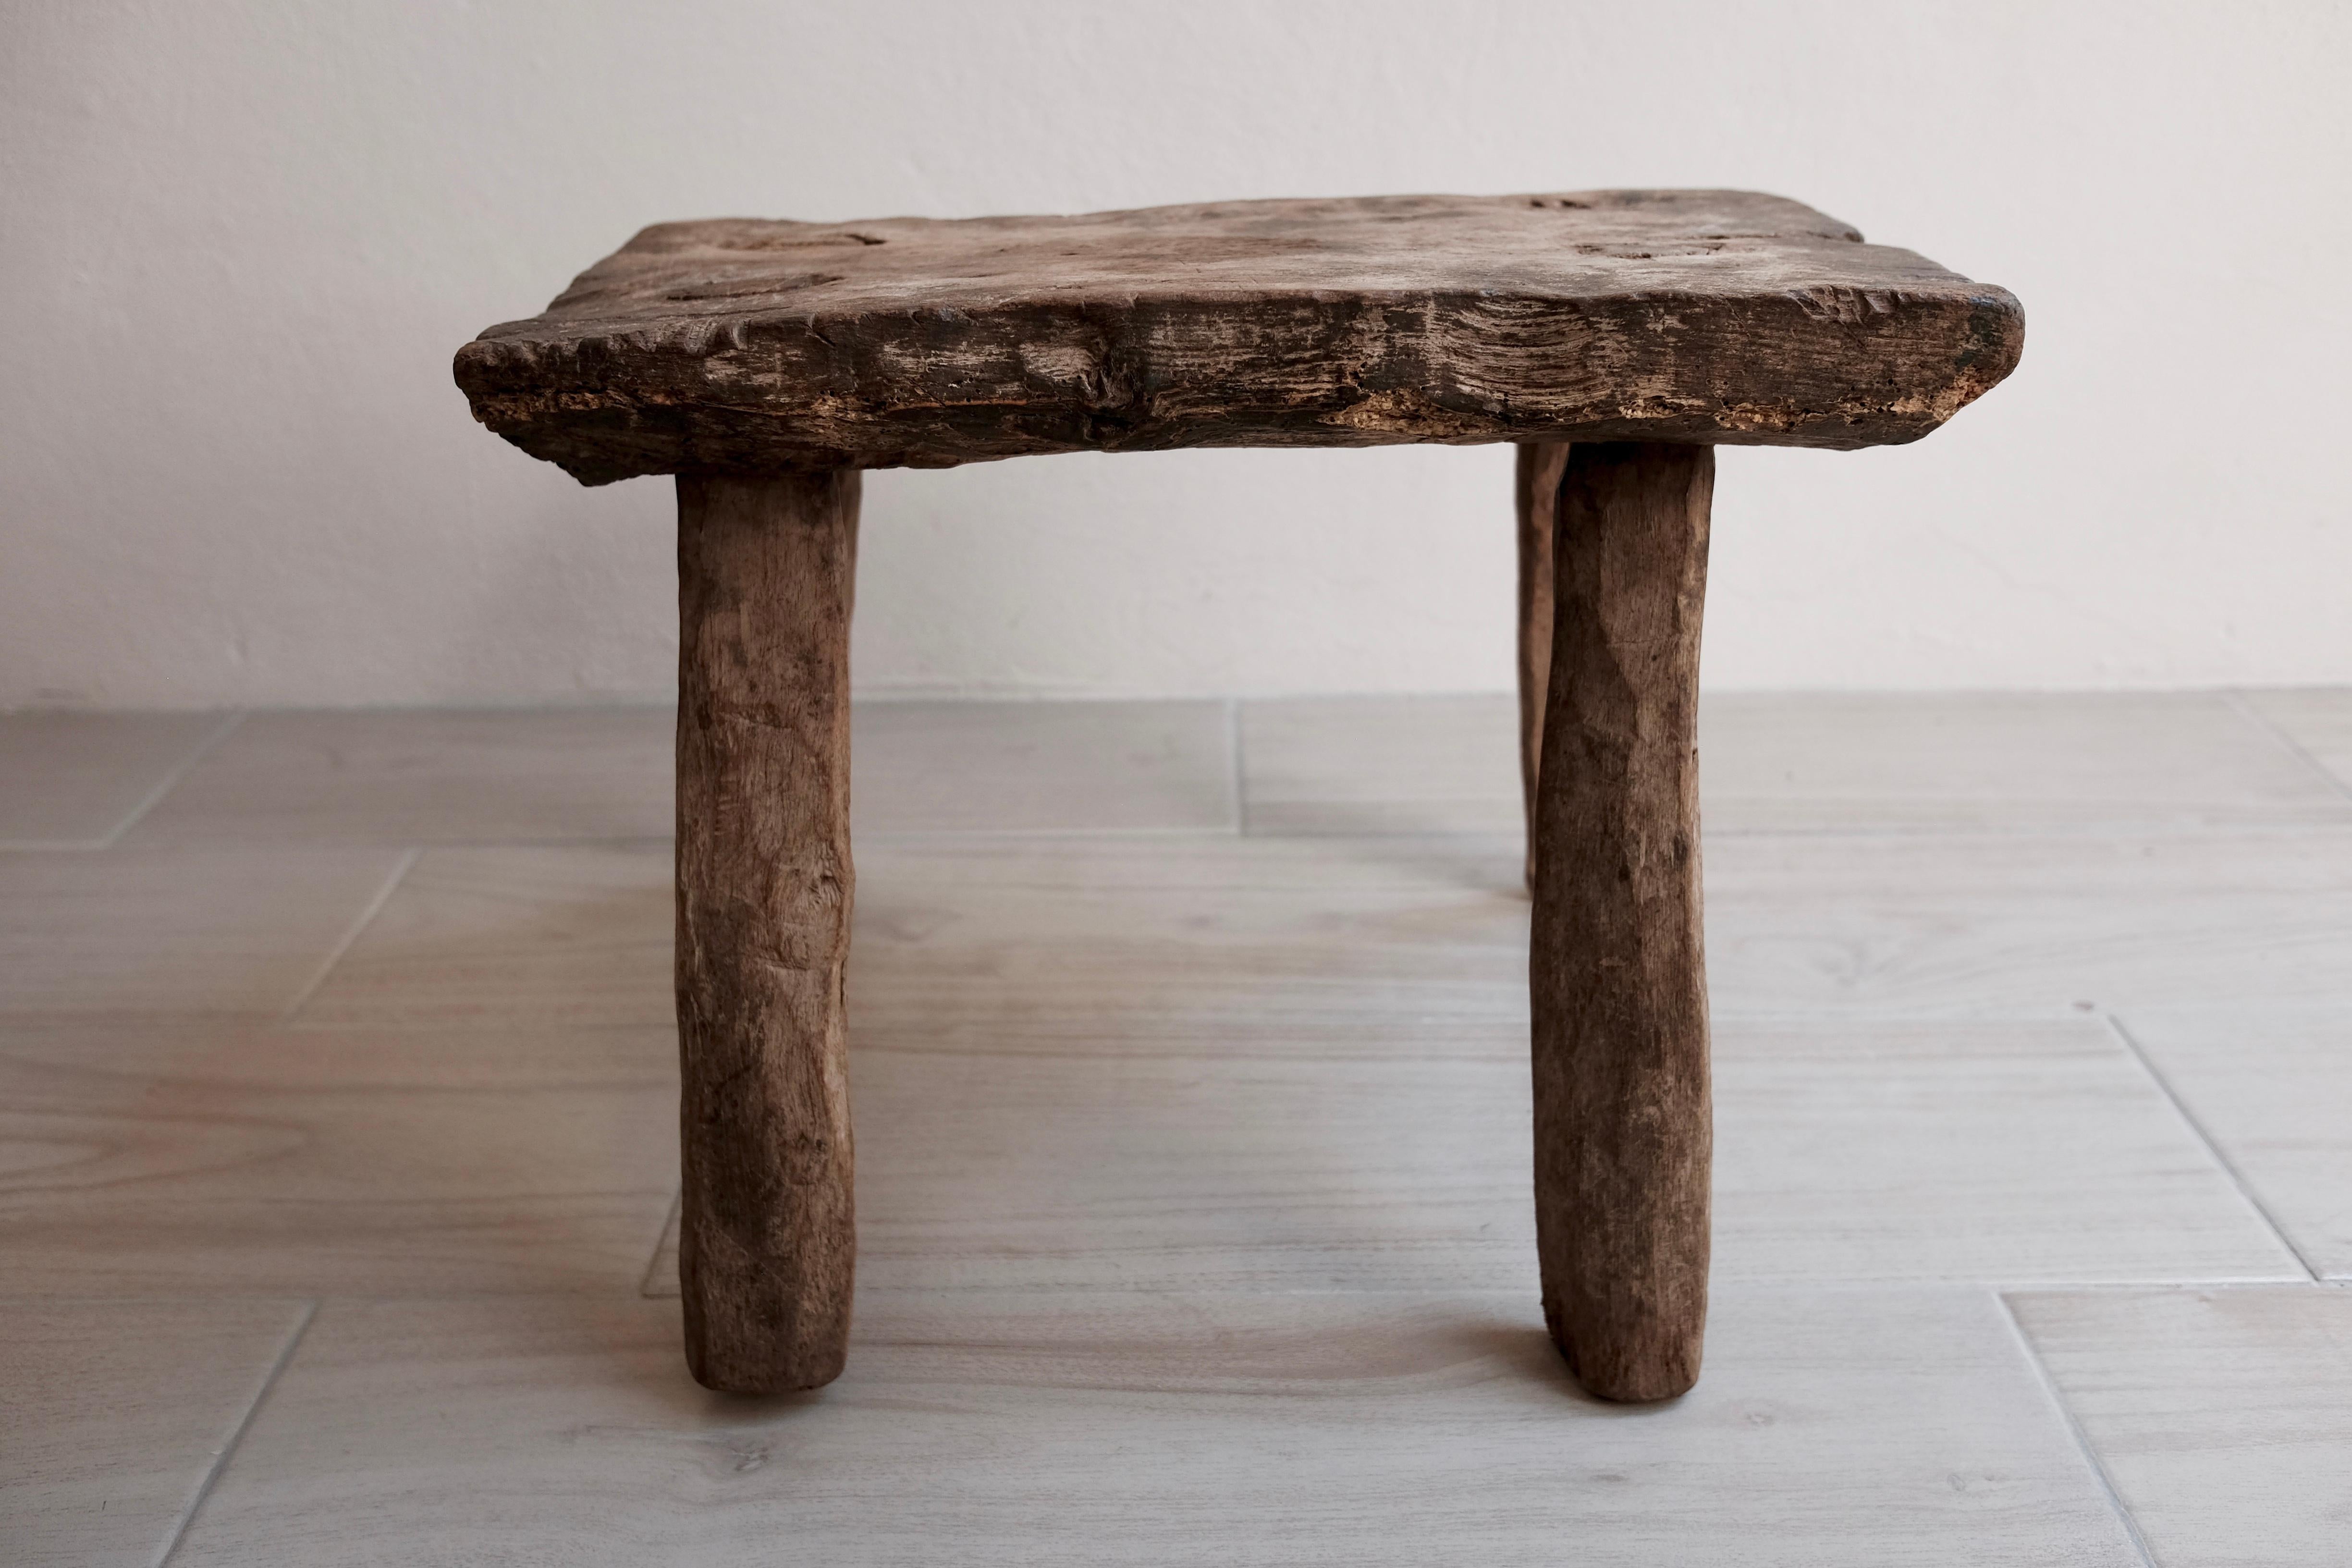 Hand-Carved Mesquite Milking Stool from Mexico, circa 1940s